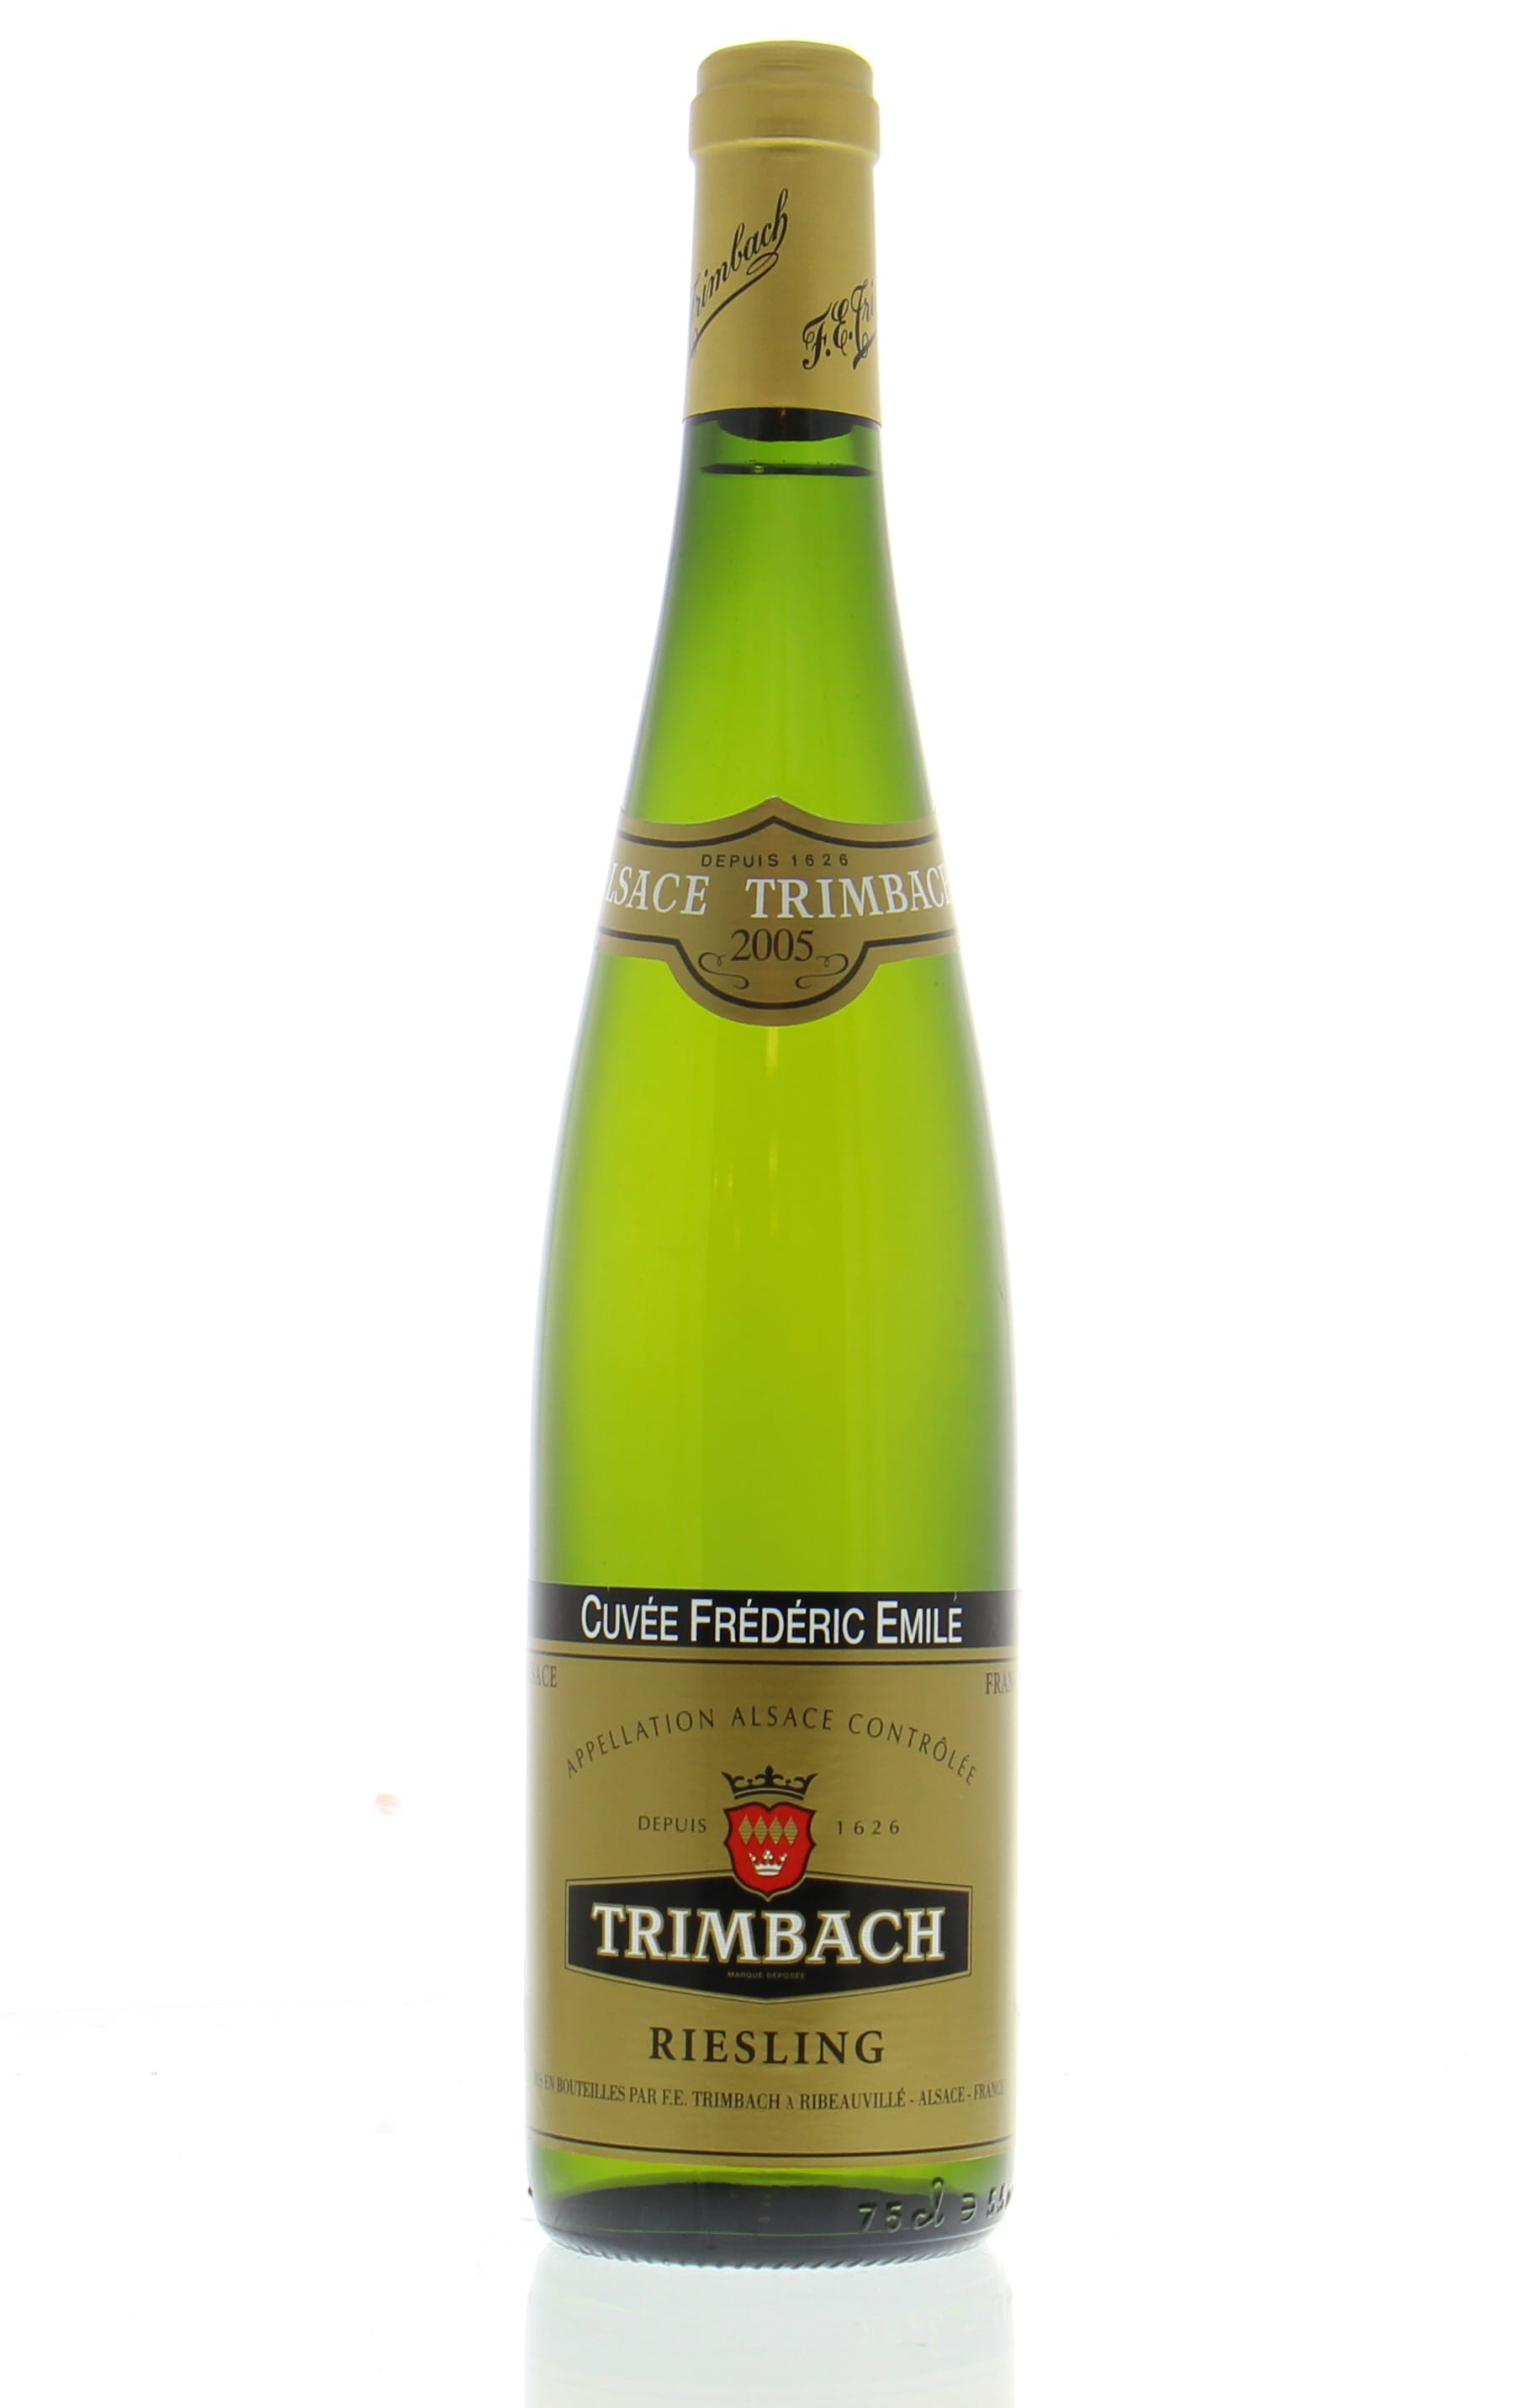 Trimbach - Riesling Cuvee Frederic Emile 2005 Perfect